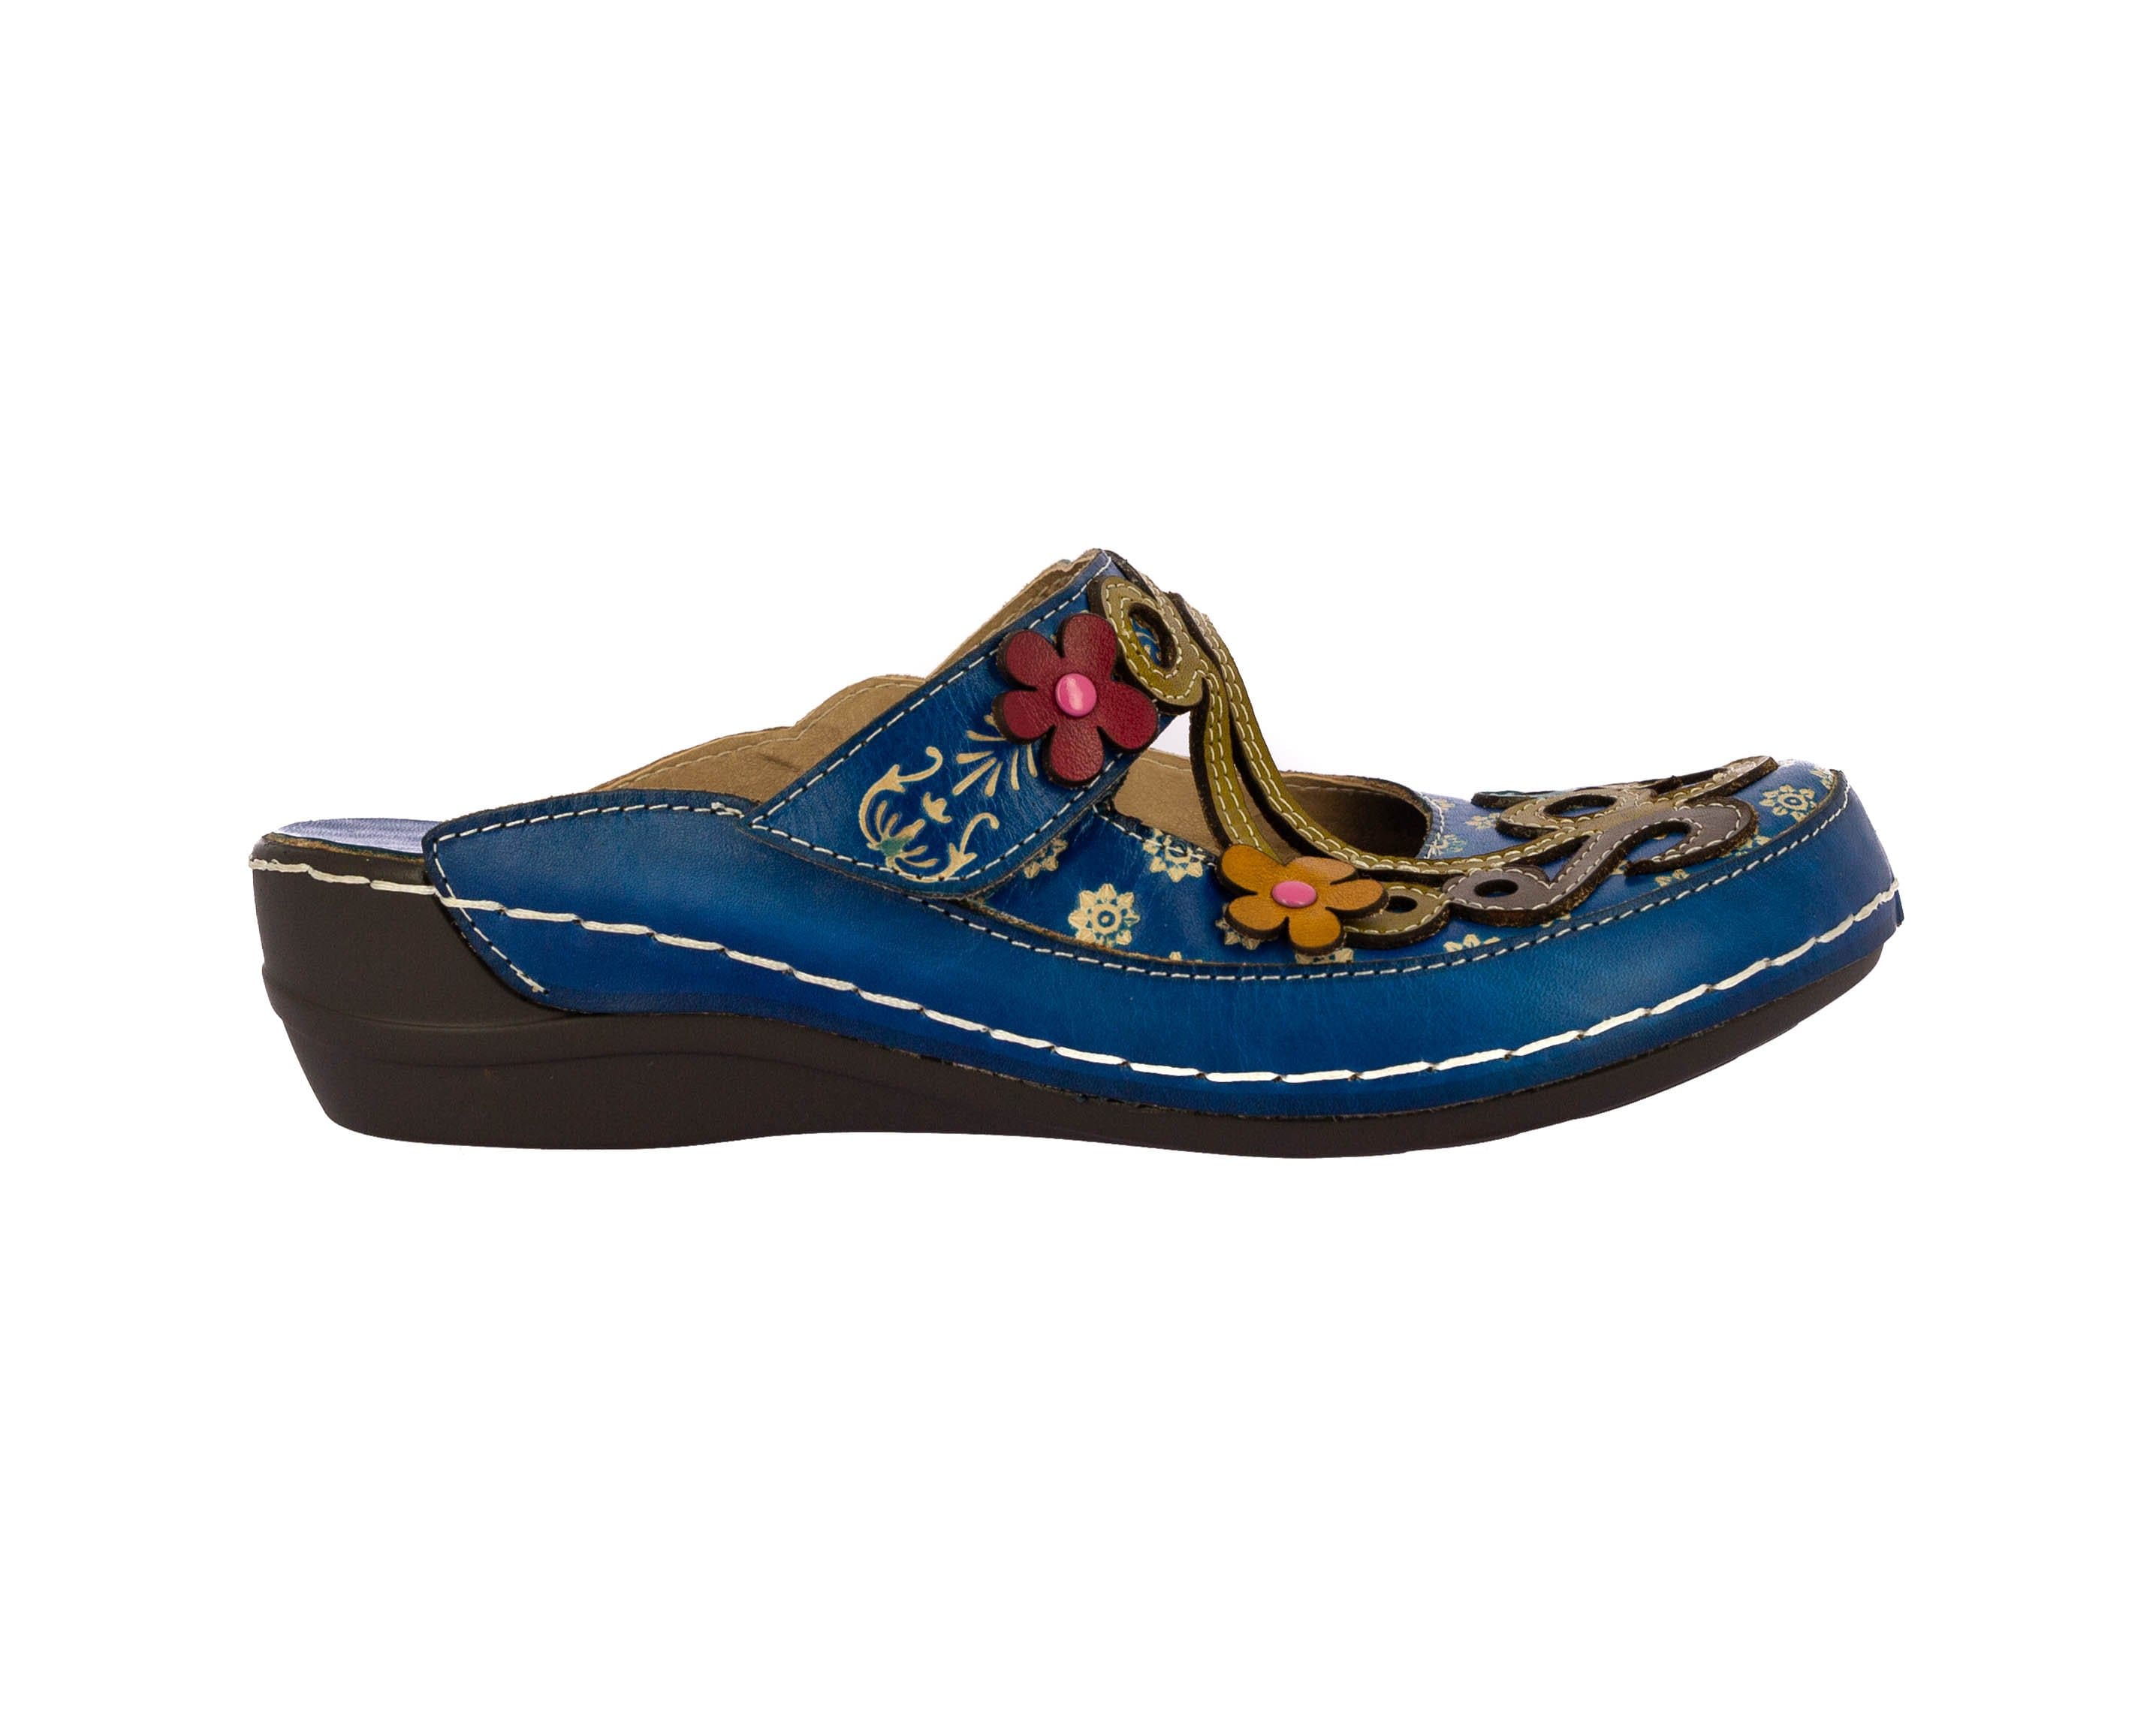 HECTO 08 - 35 / TURQUOISE skor - Mulle